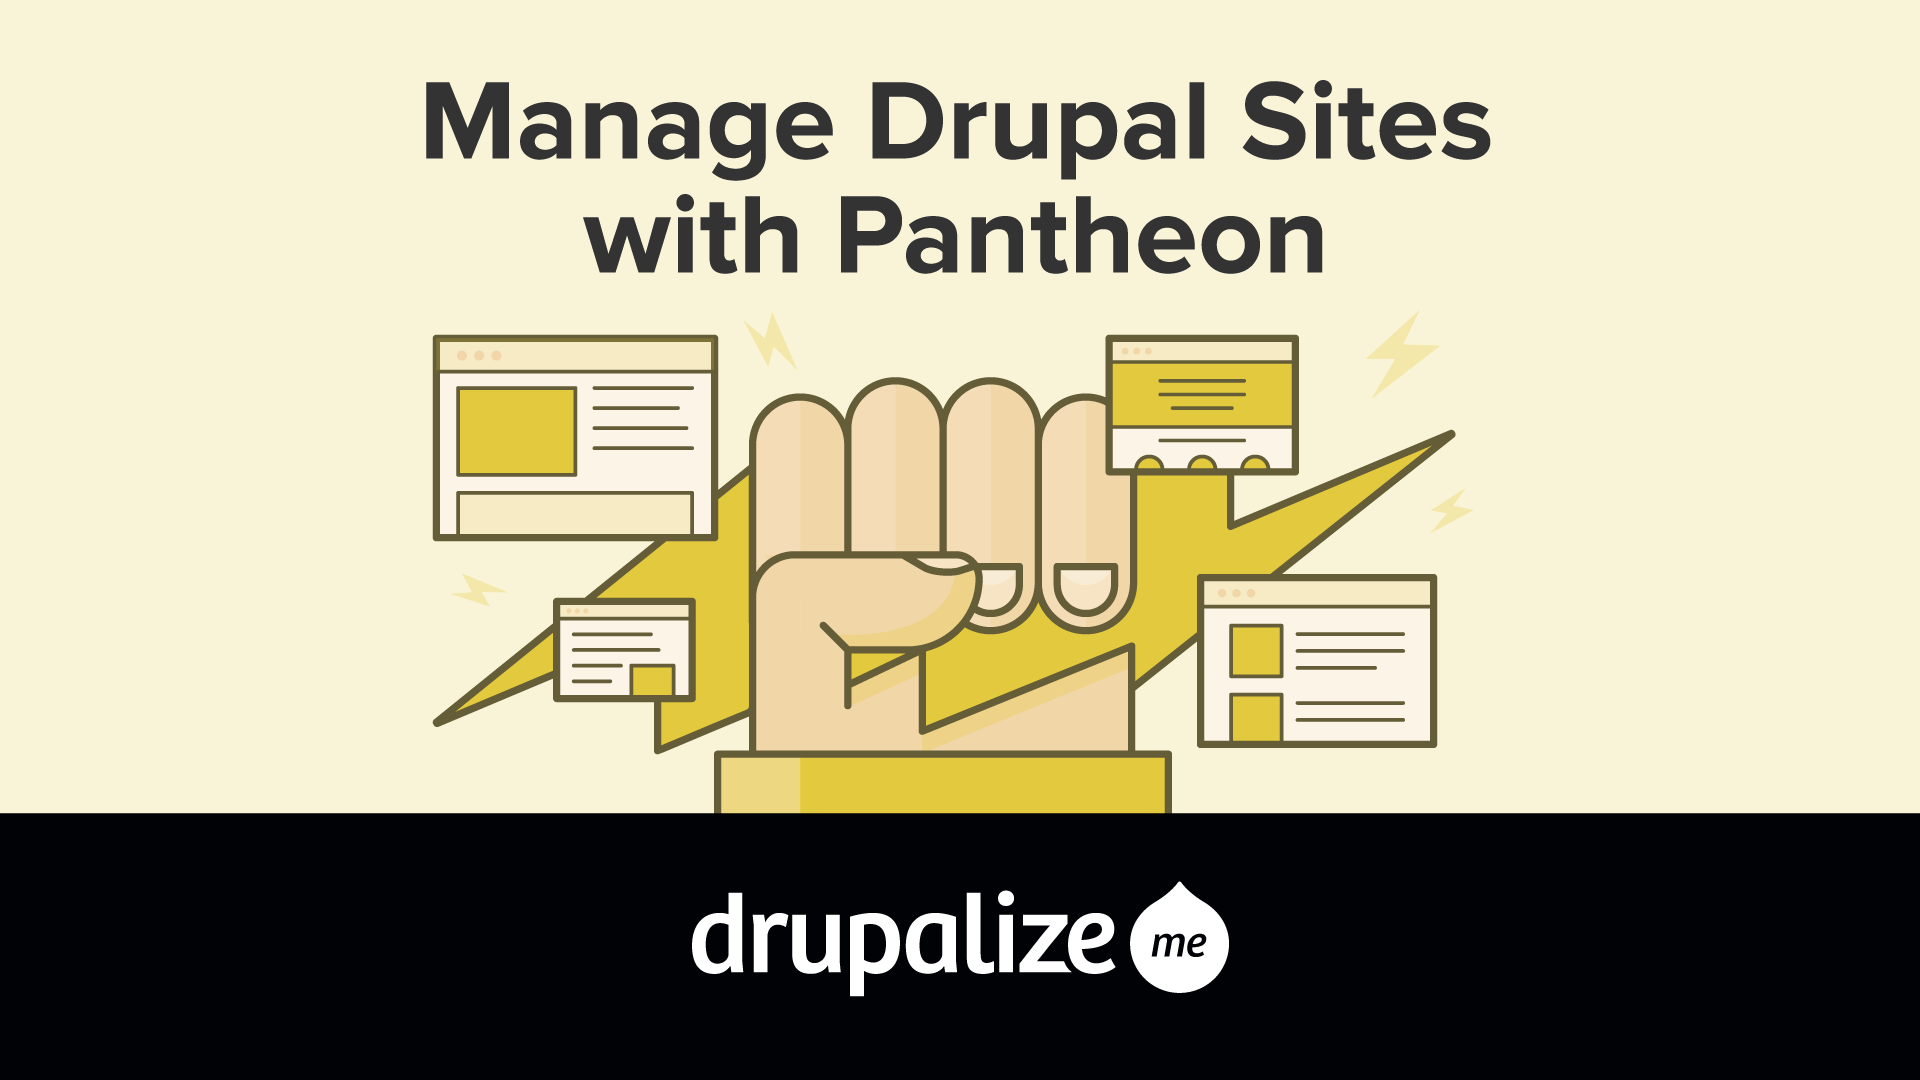 Manage Drupal Sites with Pantheon